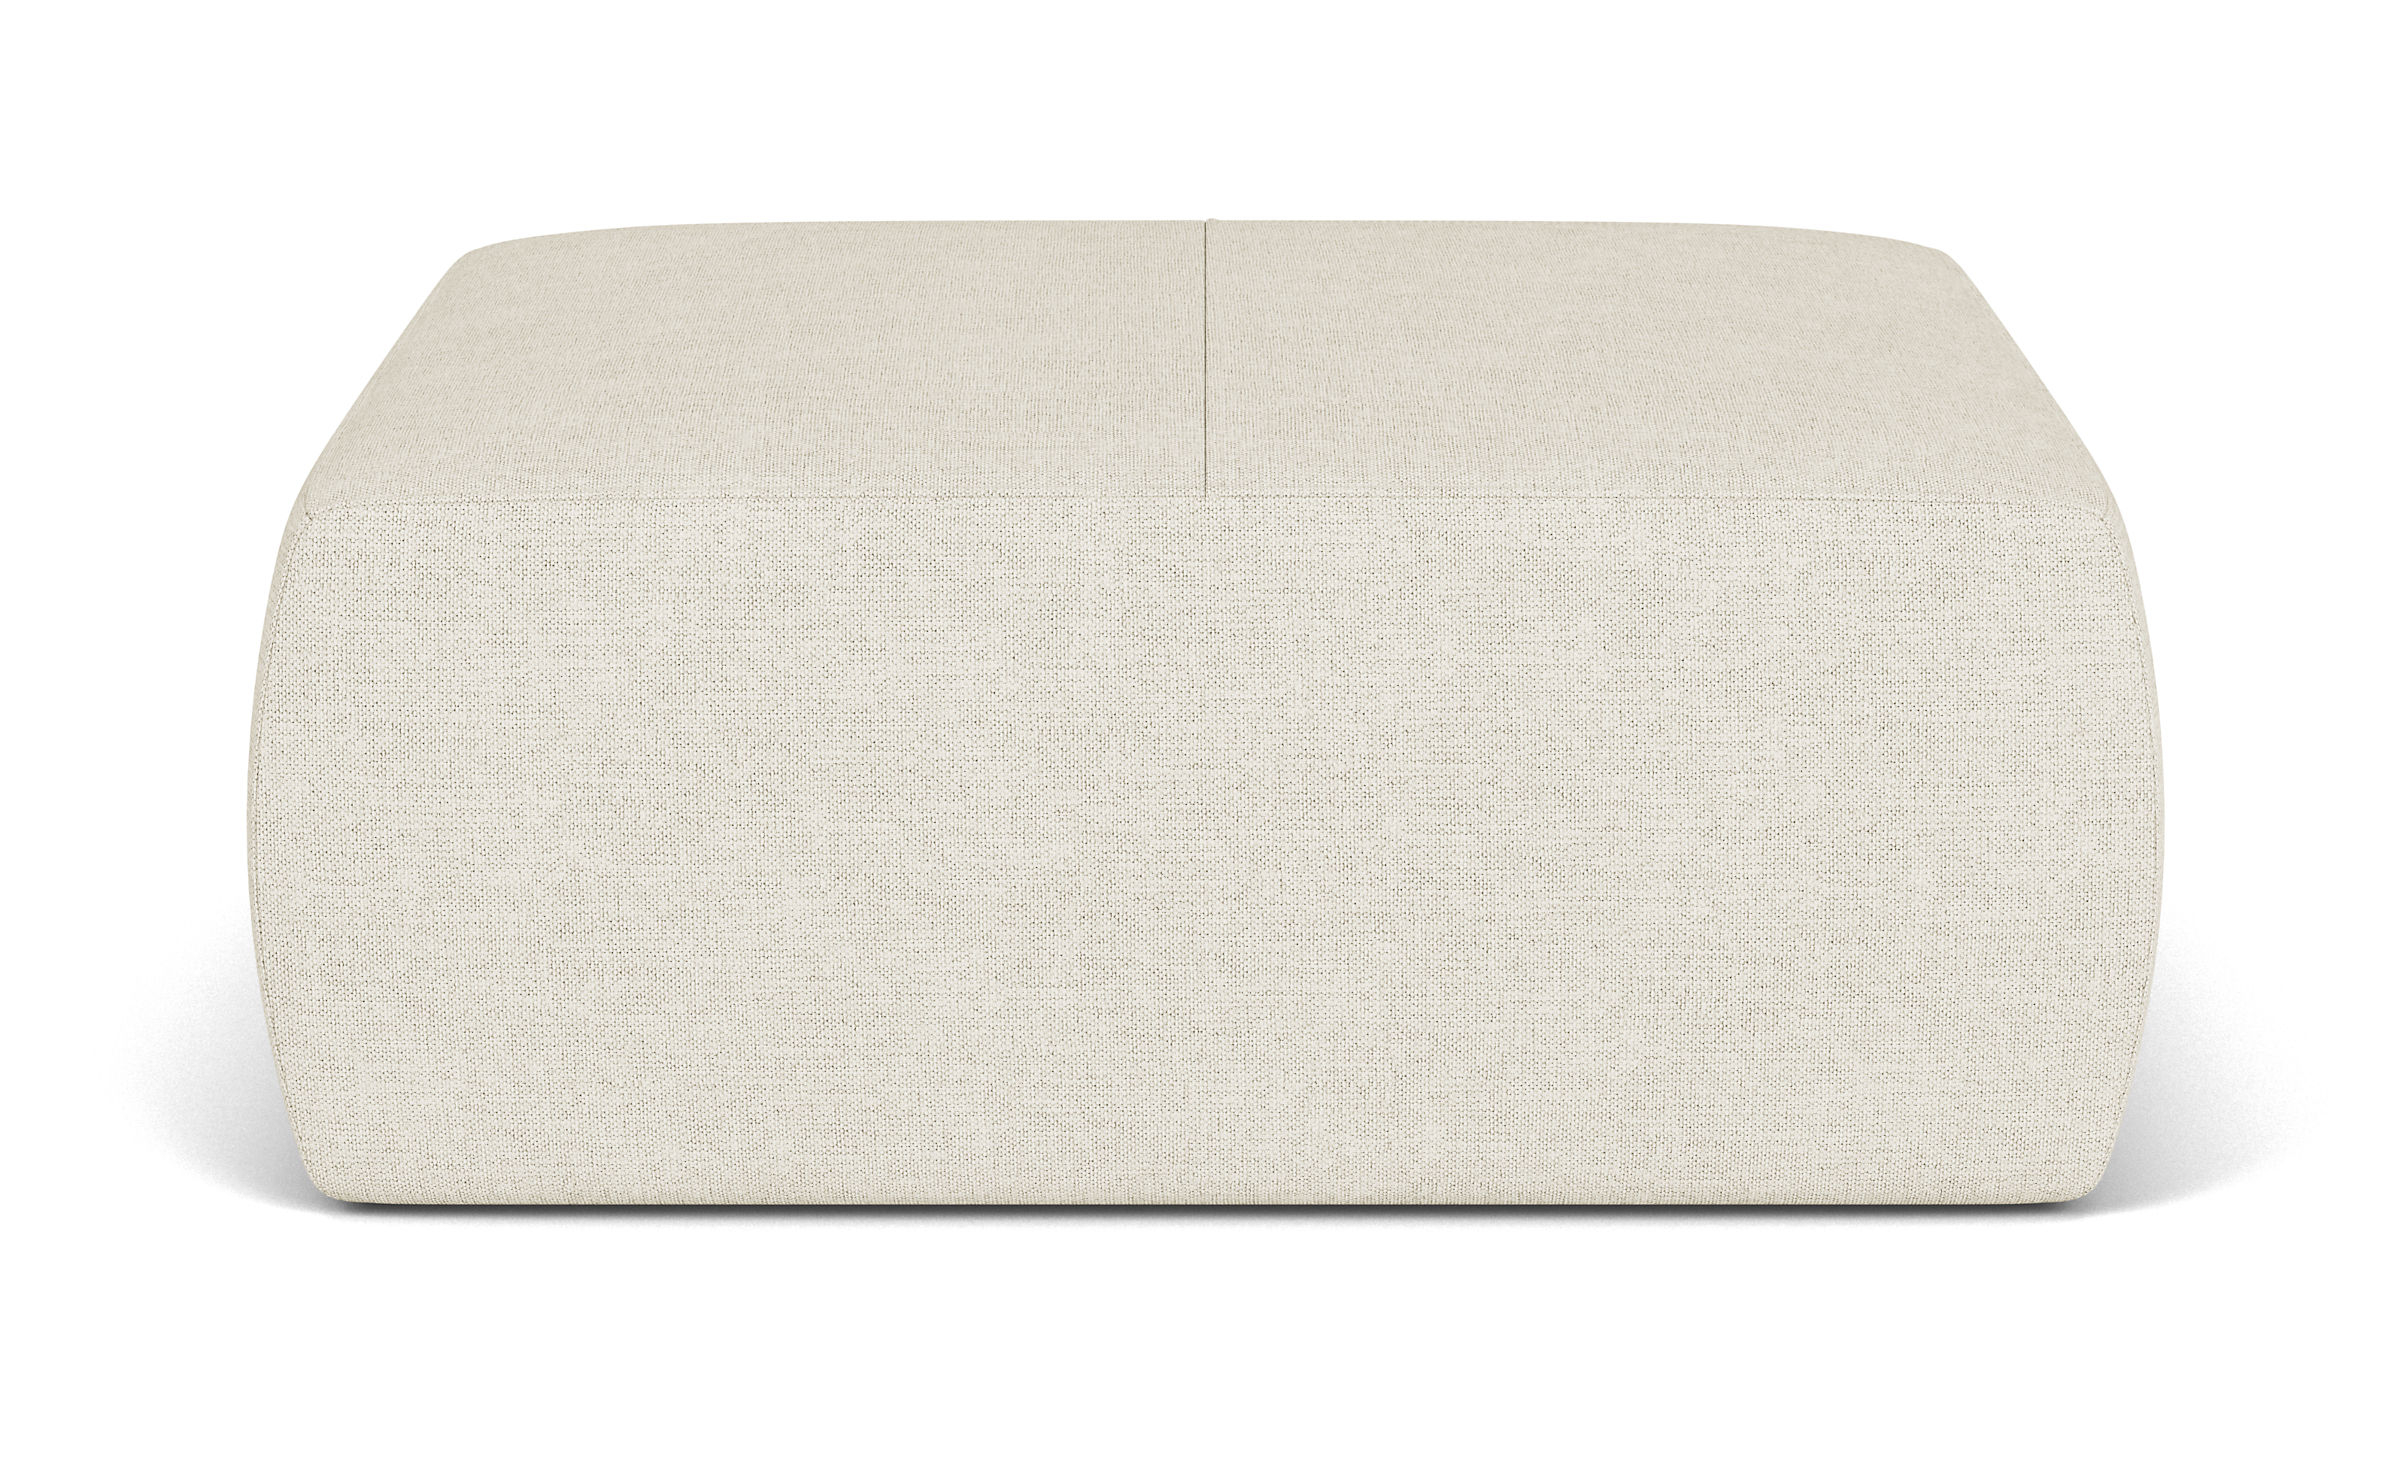 Lind 36w 36d 16h Square Ottoman in Sumner Ivory